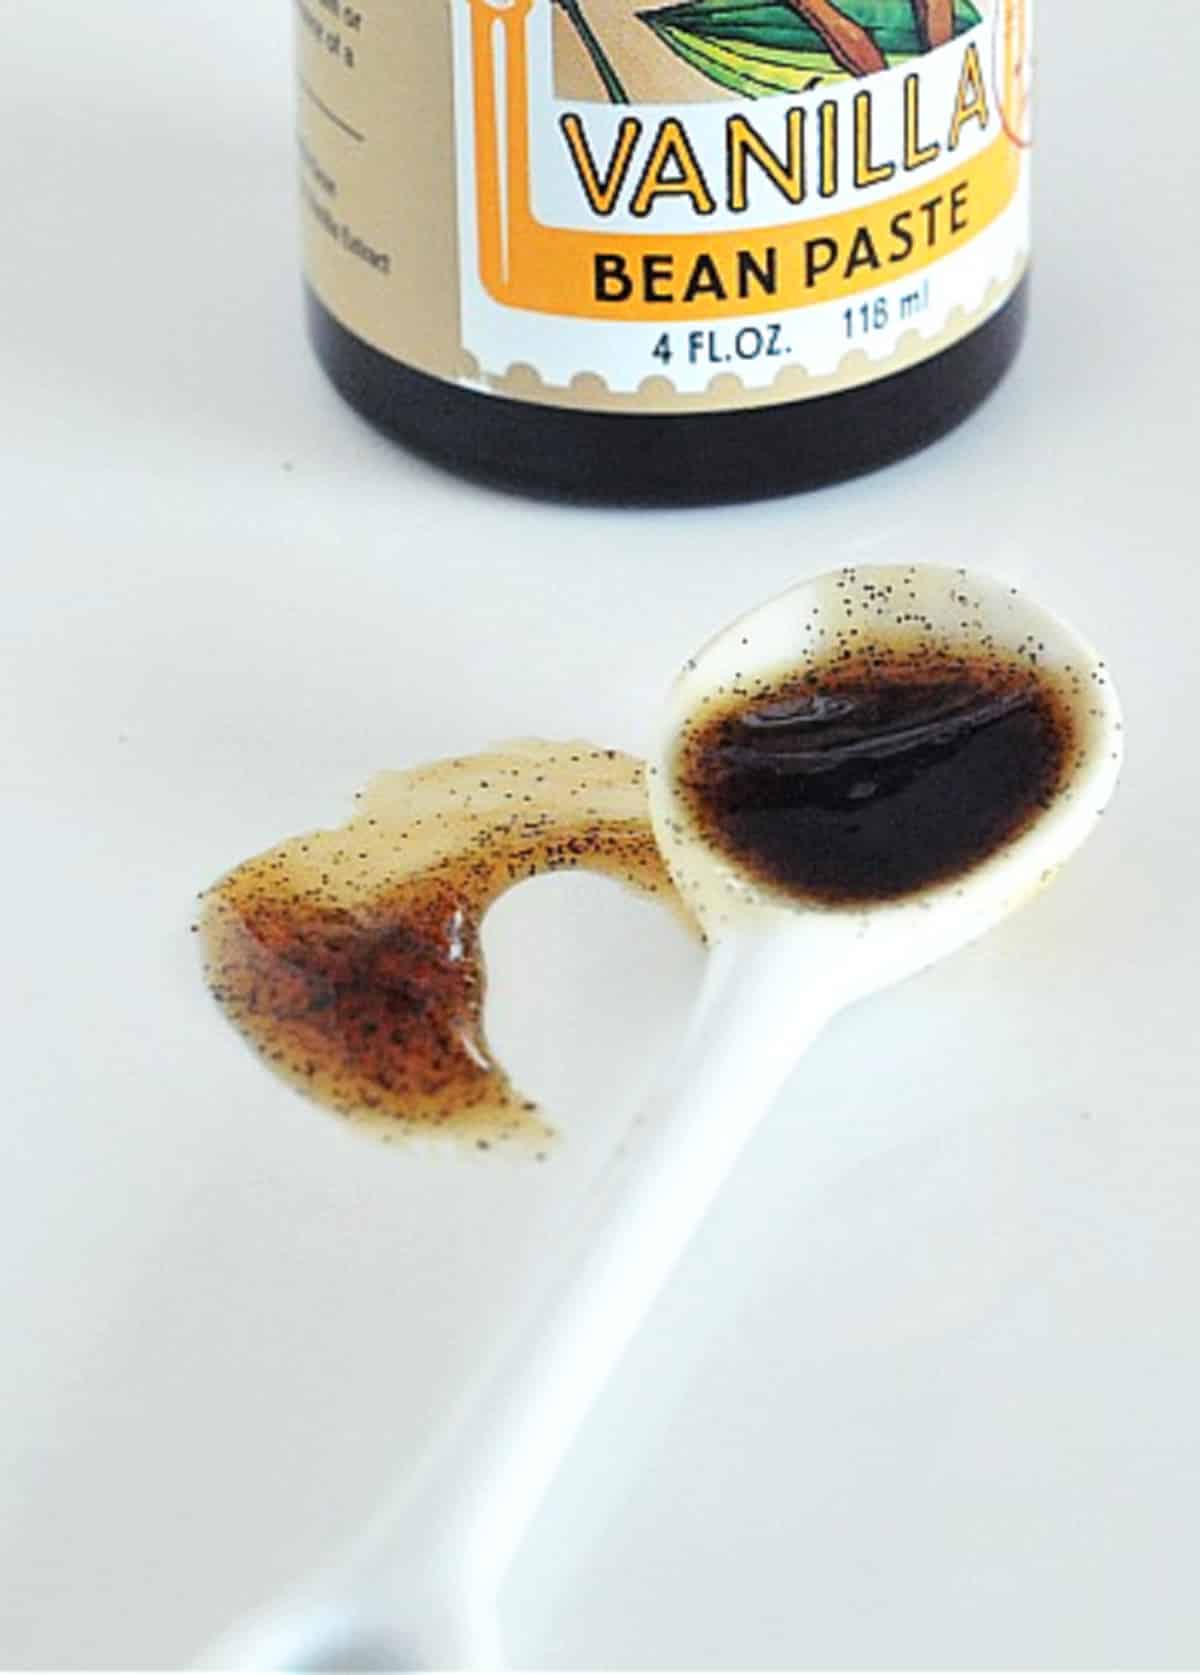 A white ceramic spoon of vanilla bean paste with a smear of the paste on a shiny white surface next to the spoon. The vanilla paste jar sits behind the spoon, only partially in frame of the photo.